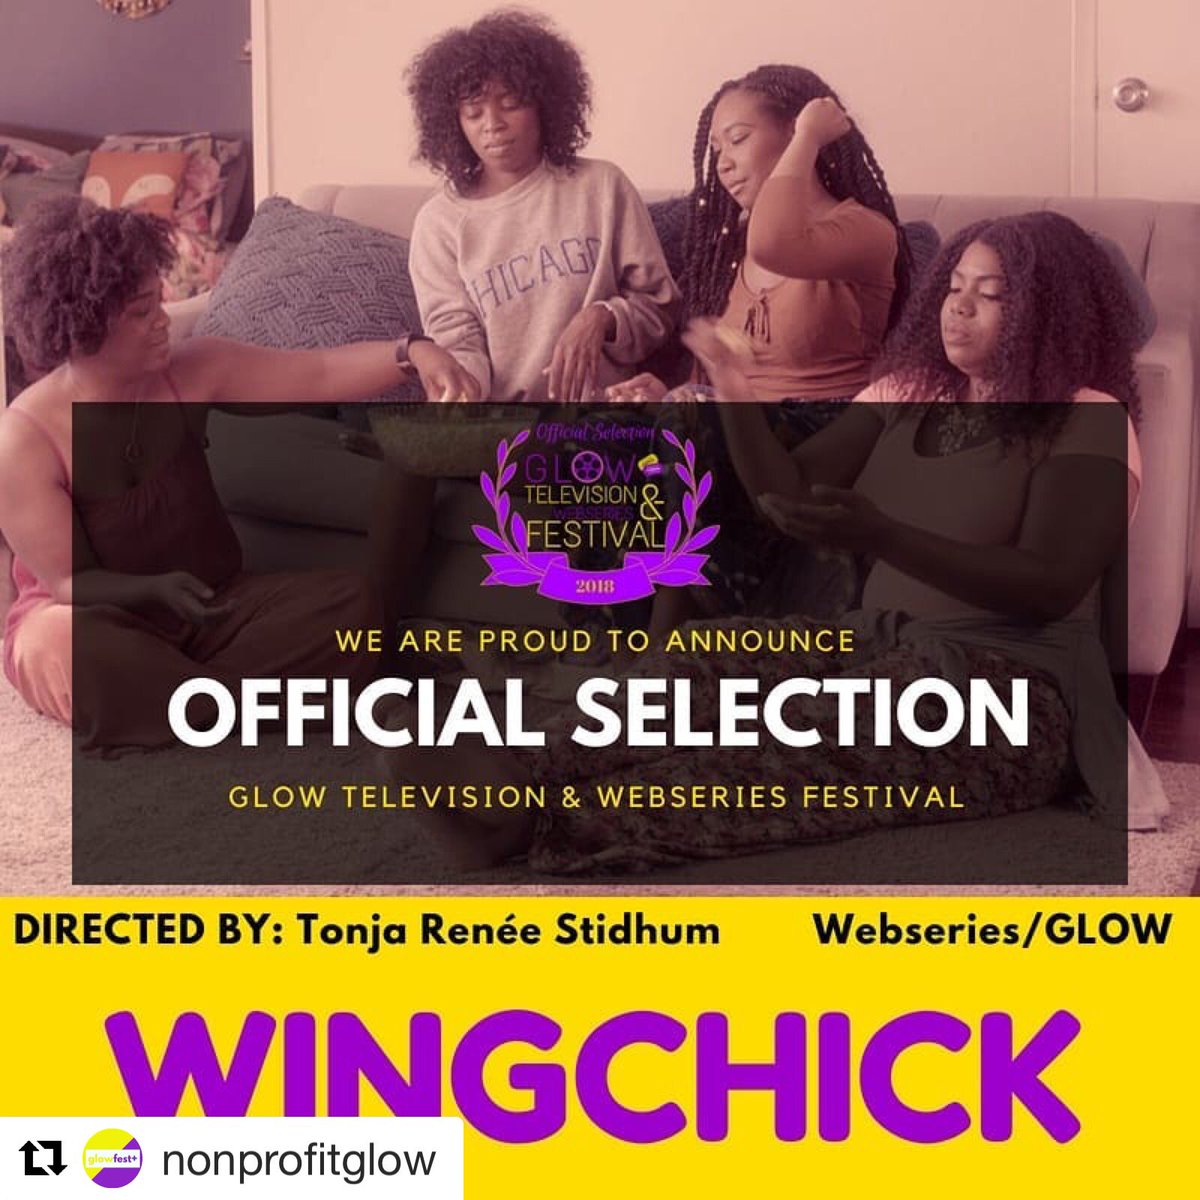 🗣 THIS IS NOT A DRILL! #WingChick 🐥 is now an official selection at #GlowFest! We’ll see you in August, #LosAngeles! #webseries #filmfestival #comedy #blackwomendirectors #blackwomenincomedy #blkcreatives